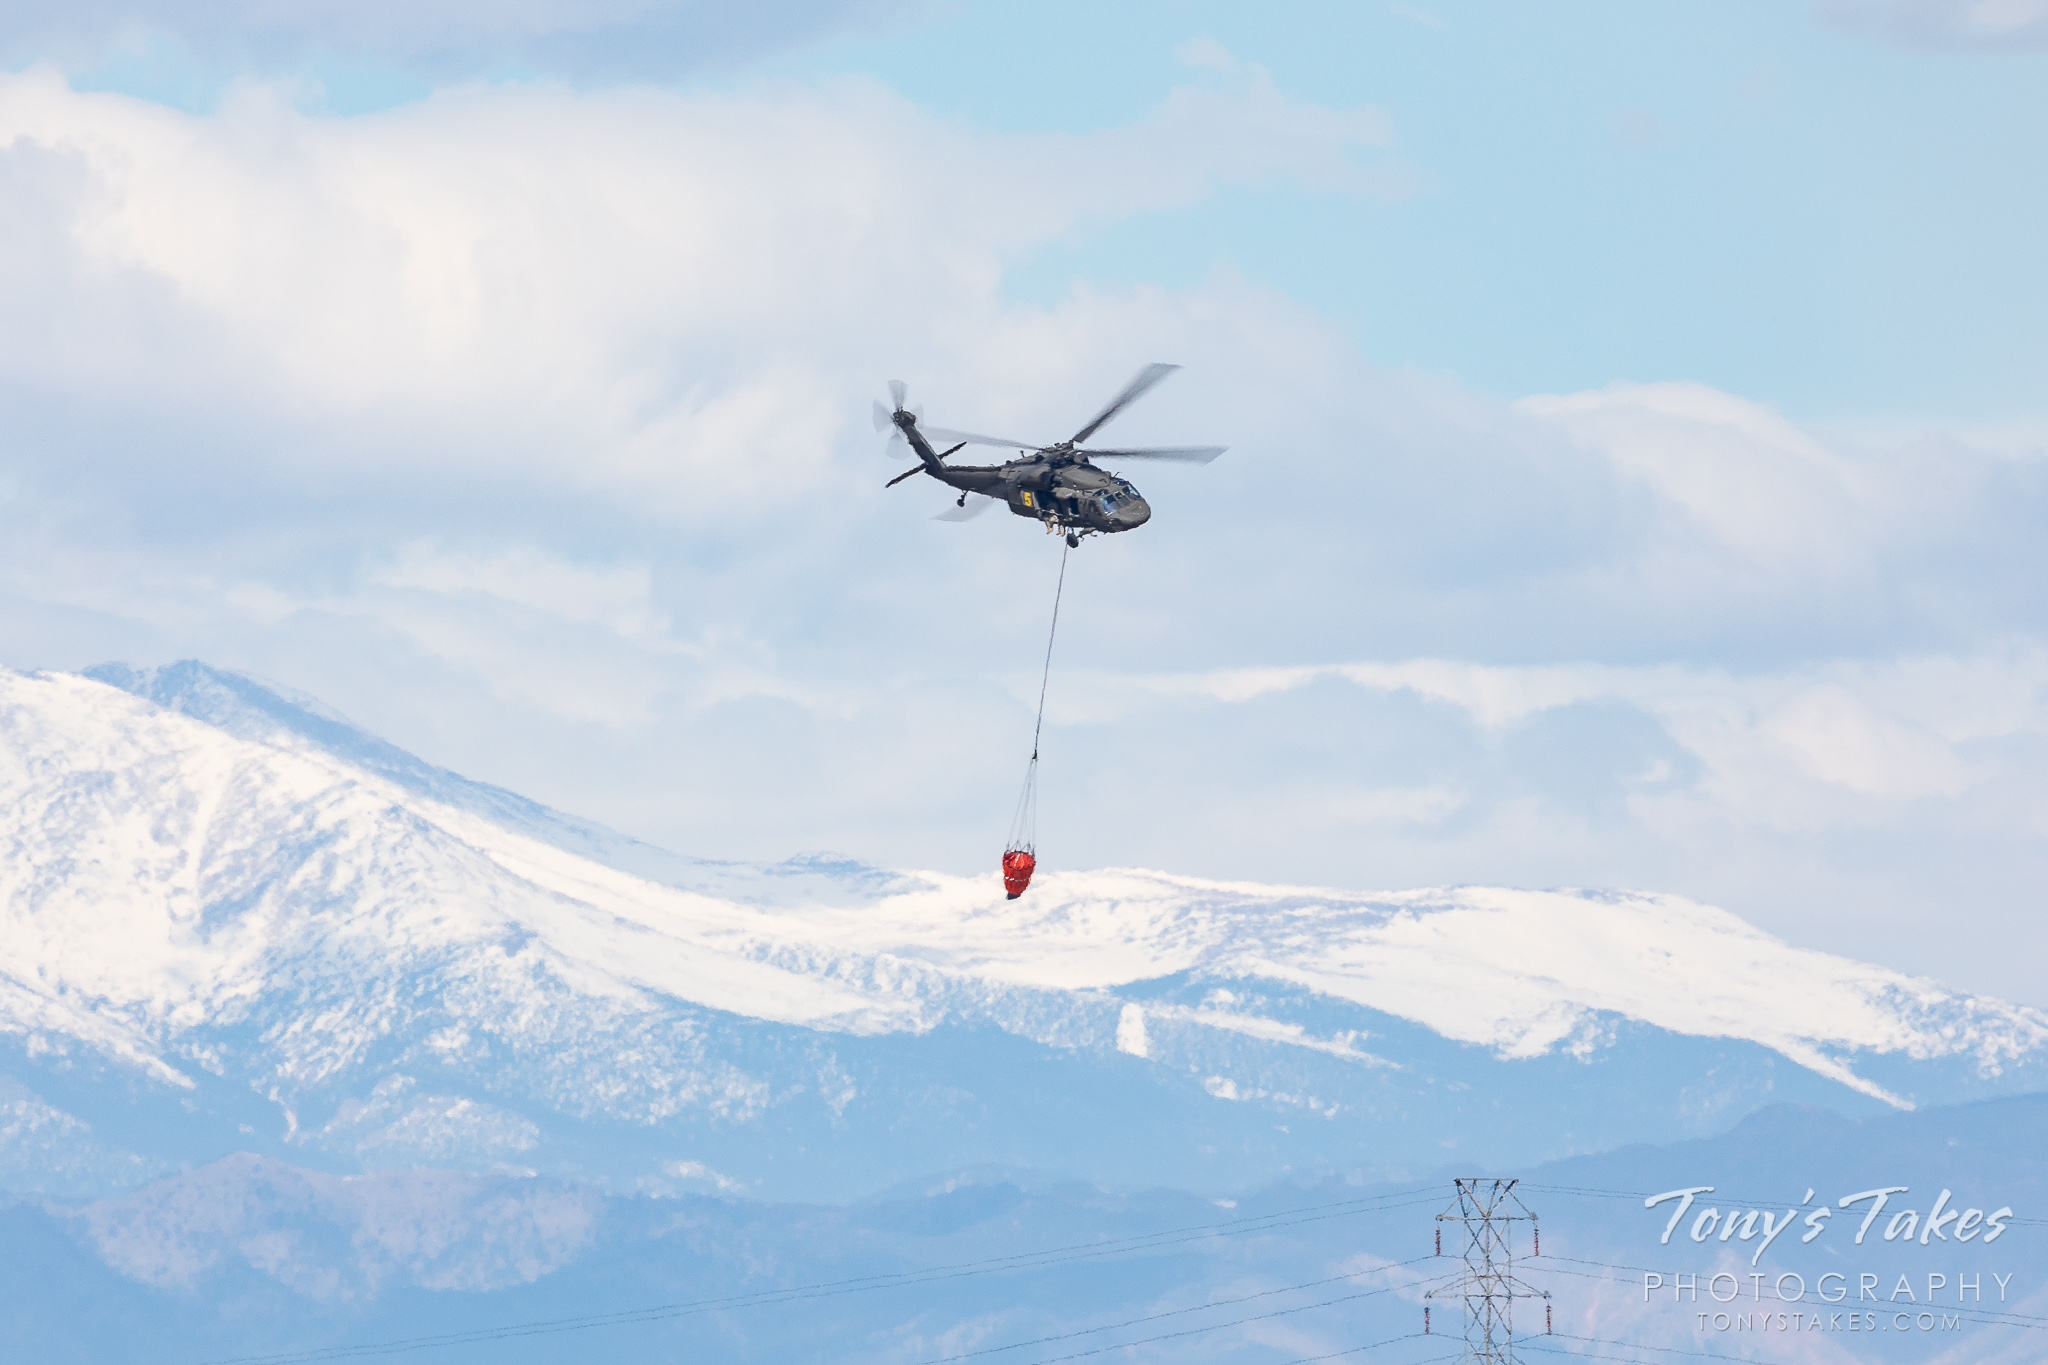 A UH-60 Blackhawk from the Colorado National Guard practices firefighting. (© Tony’s Takes)